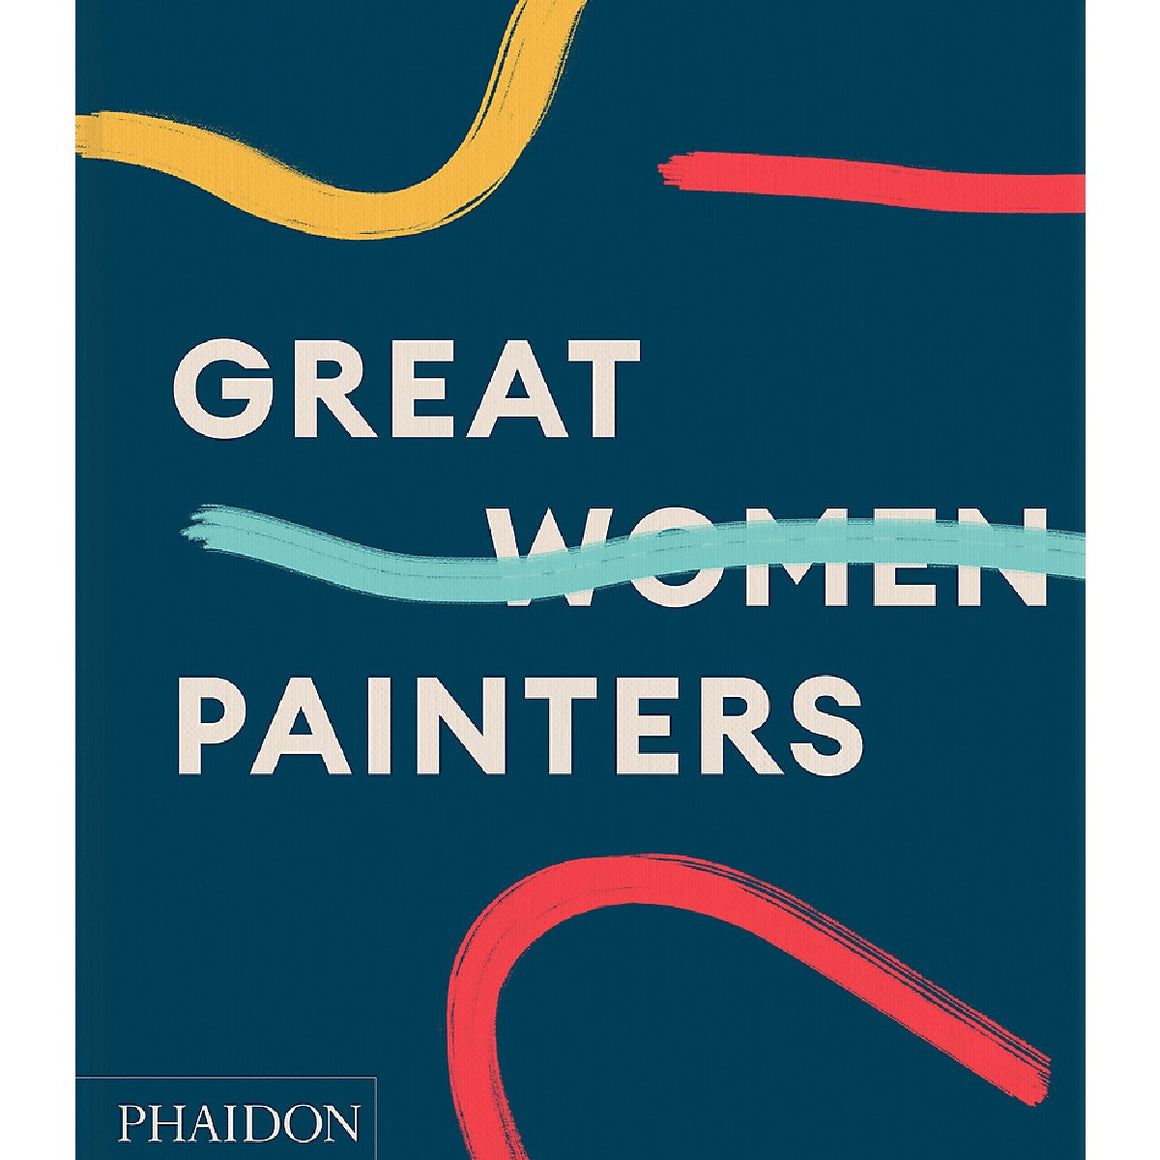 Great women painters | Author: Alison M Gineras